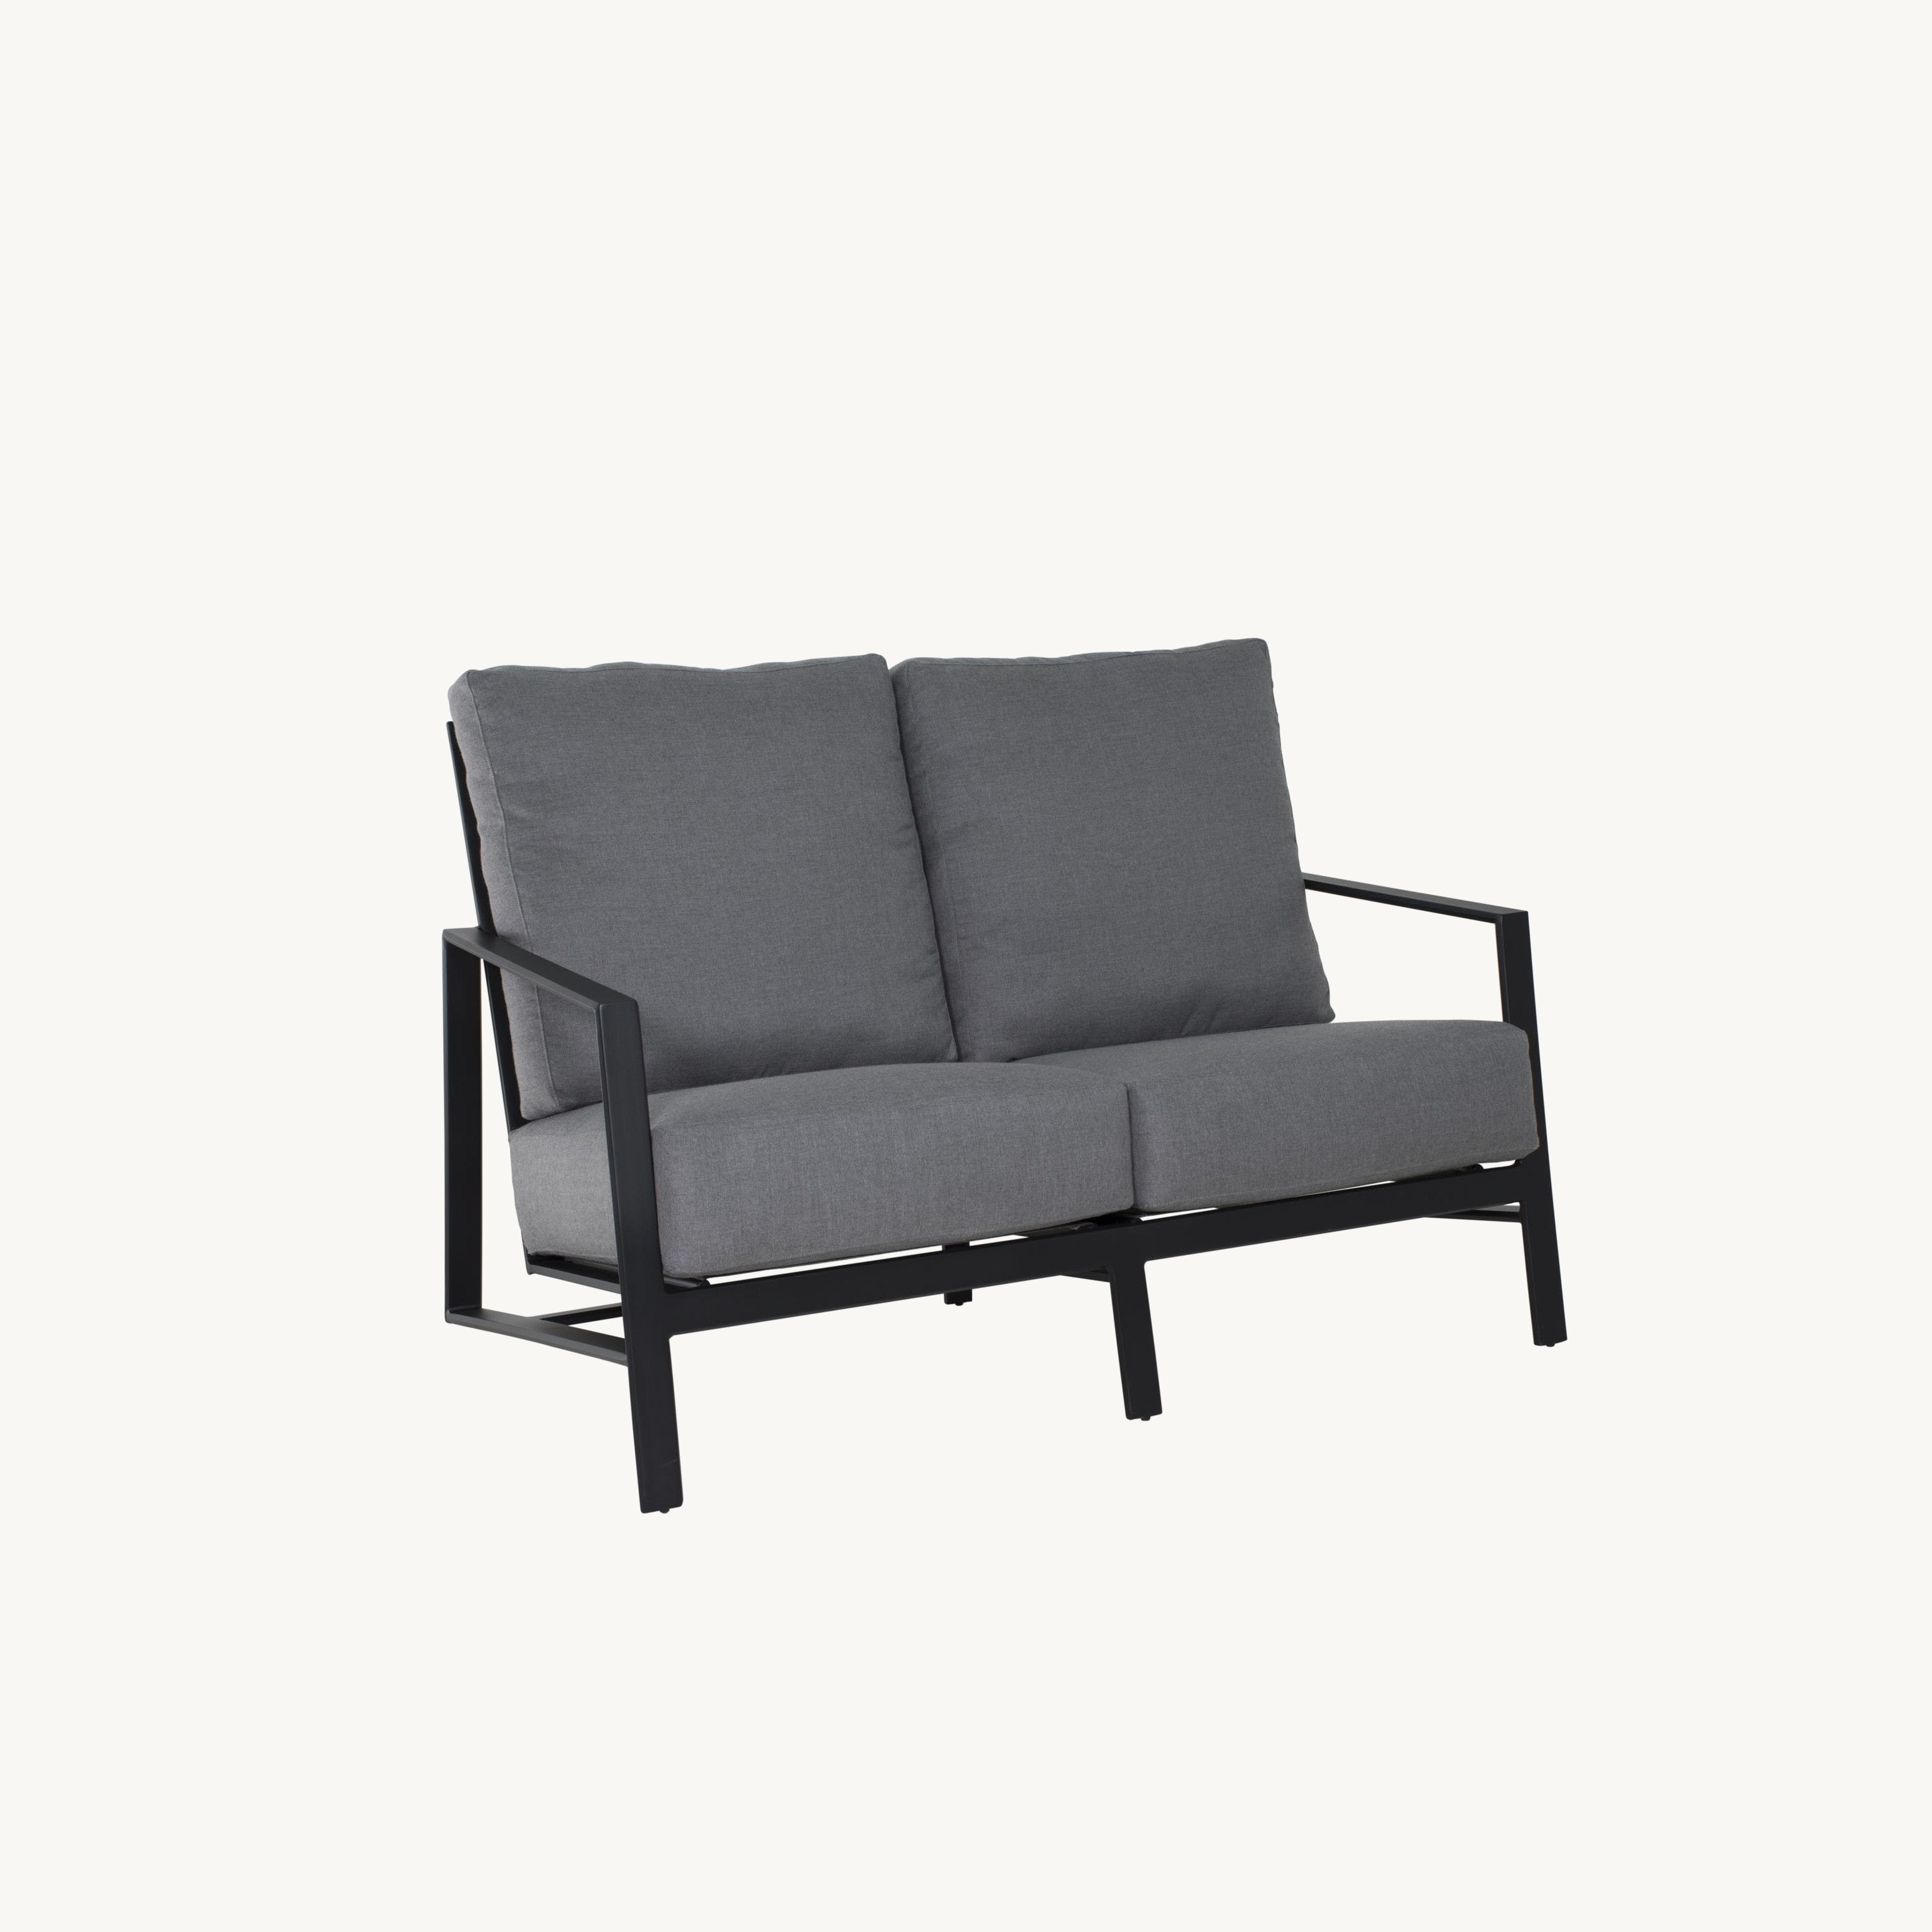 Prism Cushioned Love Seat By Castelle